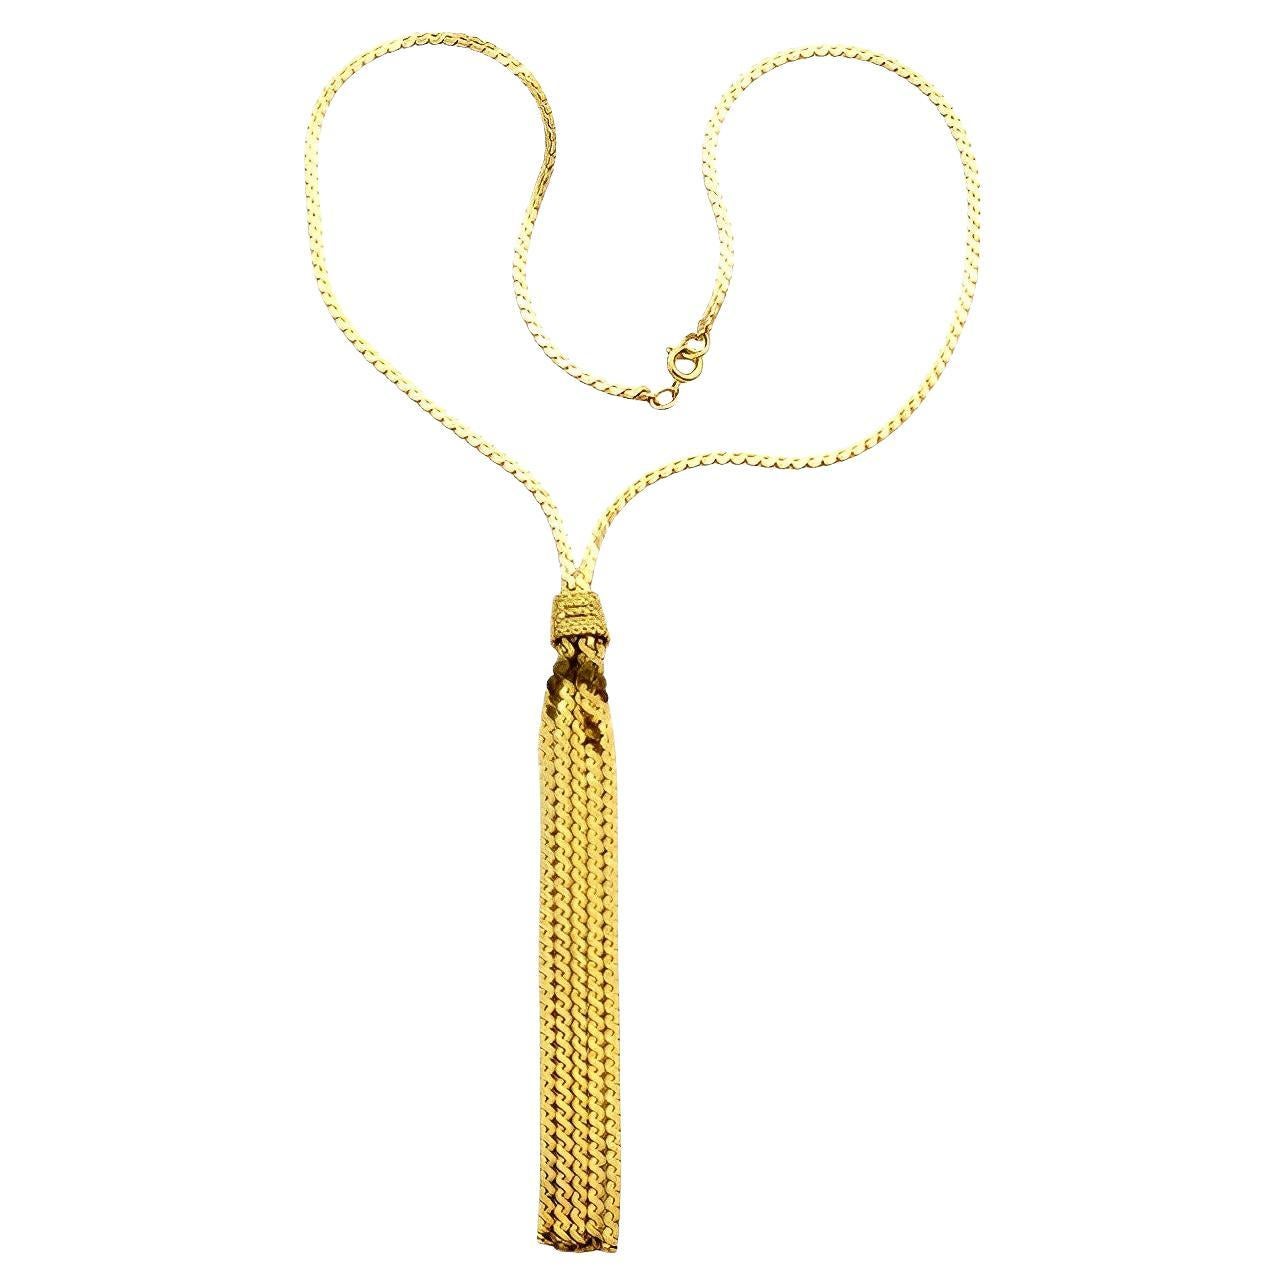 Gold Plated Plaited Serpentine Chain Tassel Necklace circa 1980s For Sale